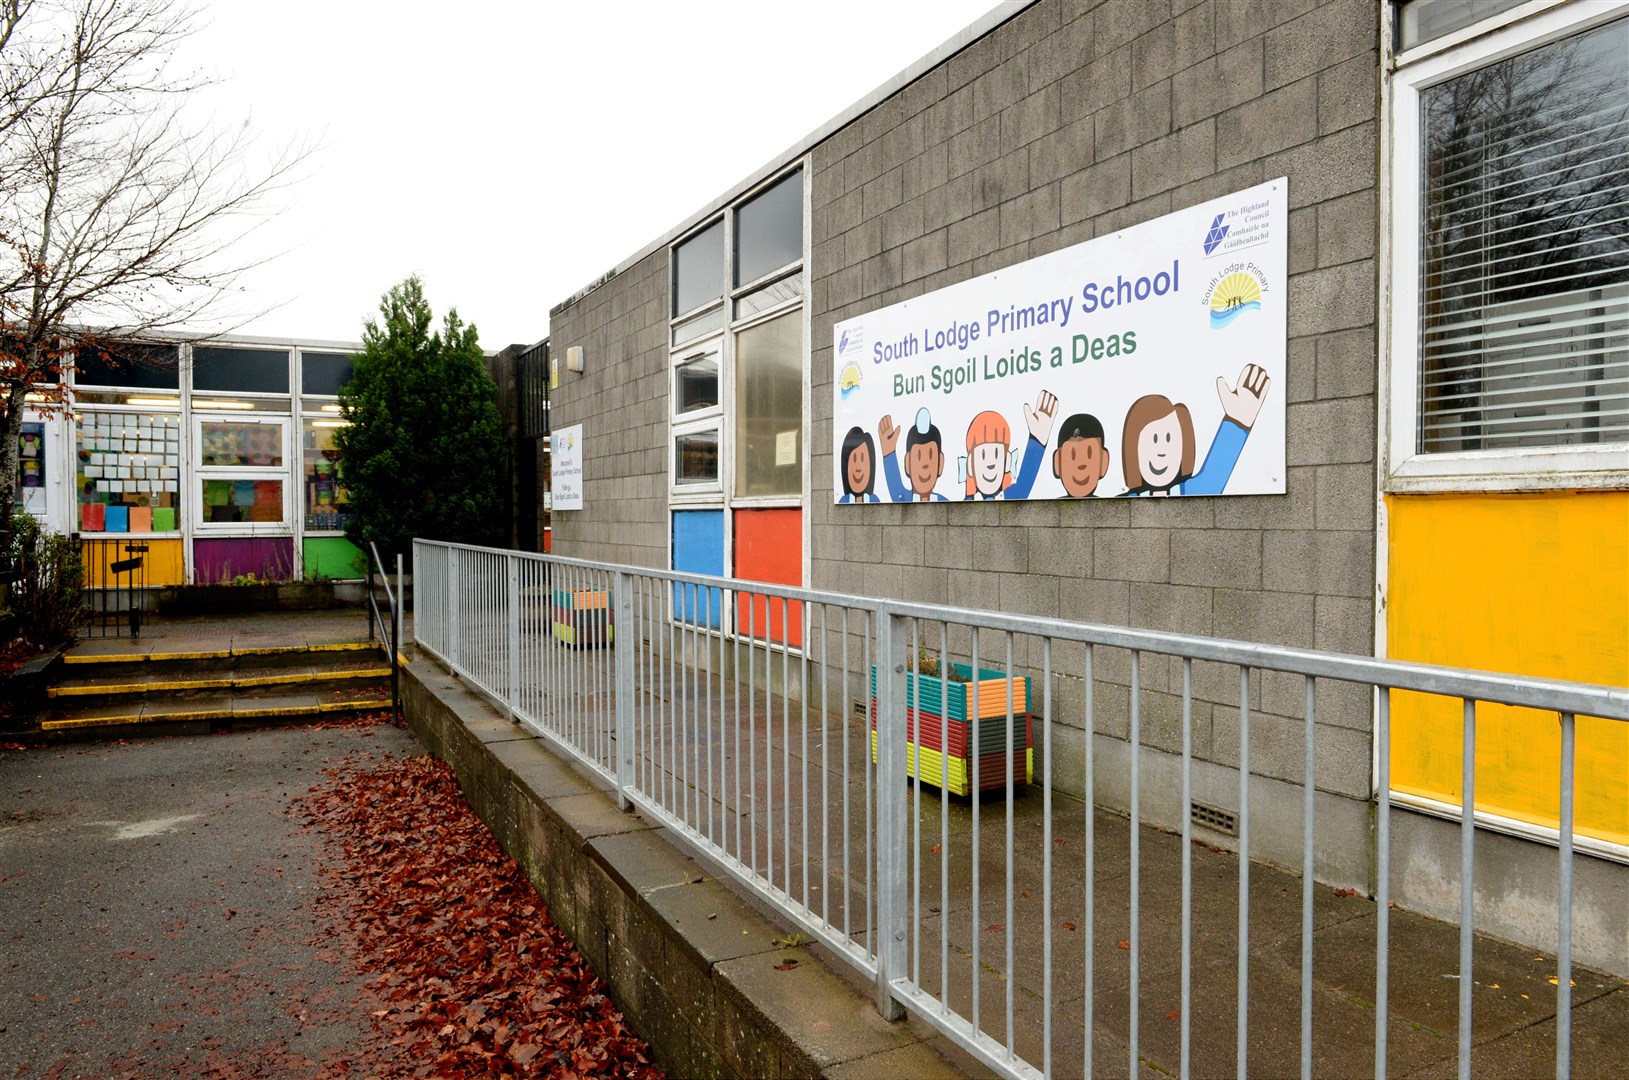 South Lodge Primary School.